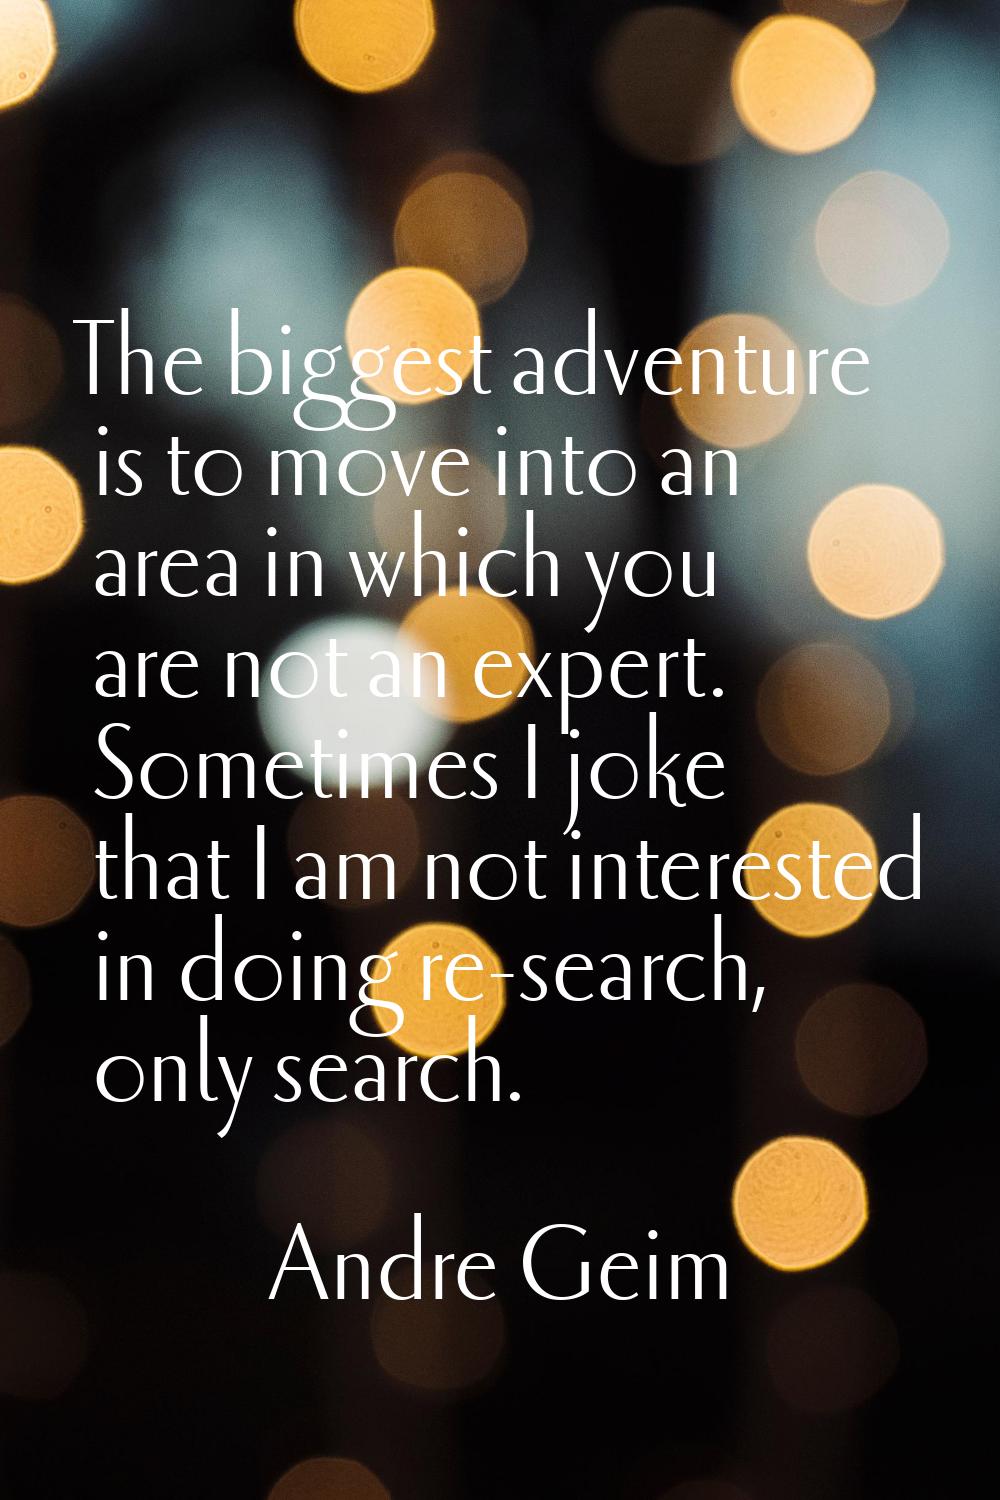 The biggest adventure is to move into an area in which you are not an expert. Sometimes I joke that